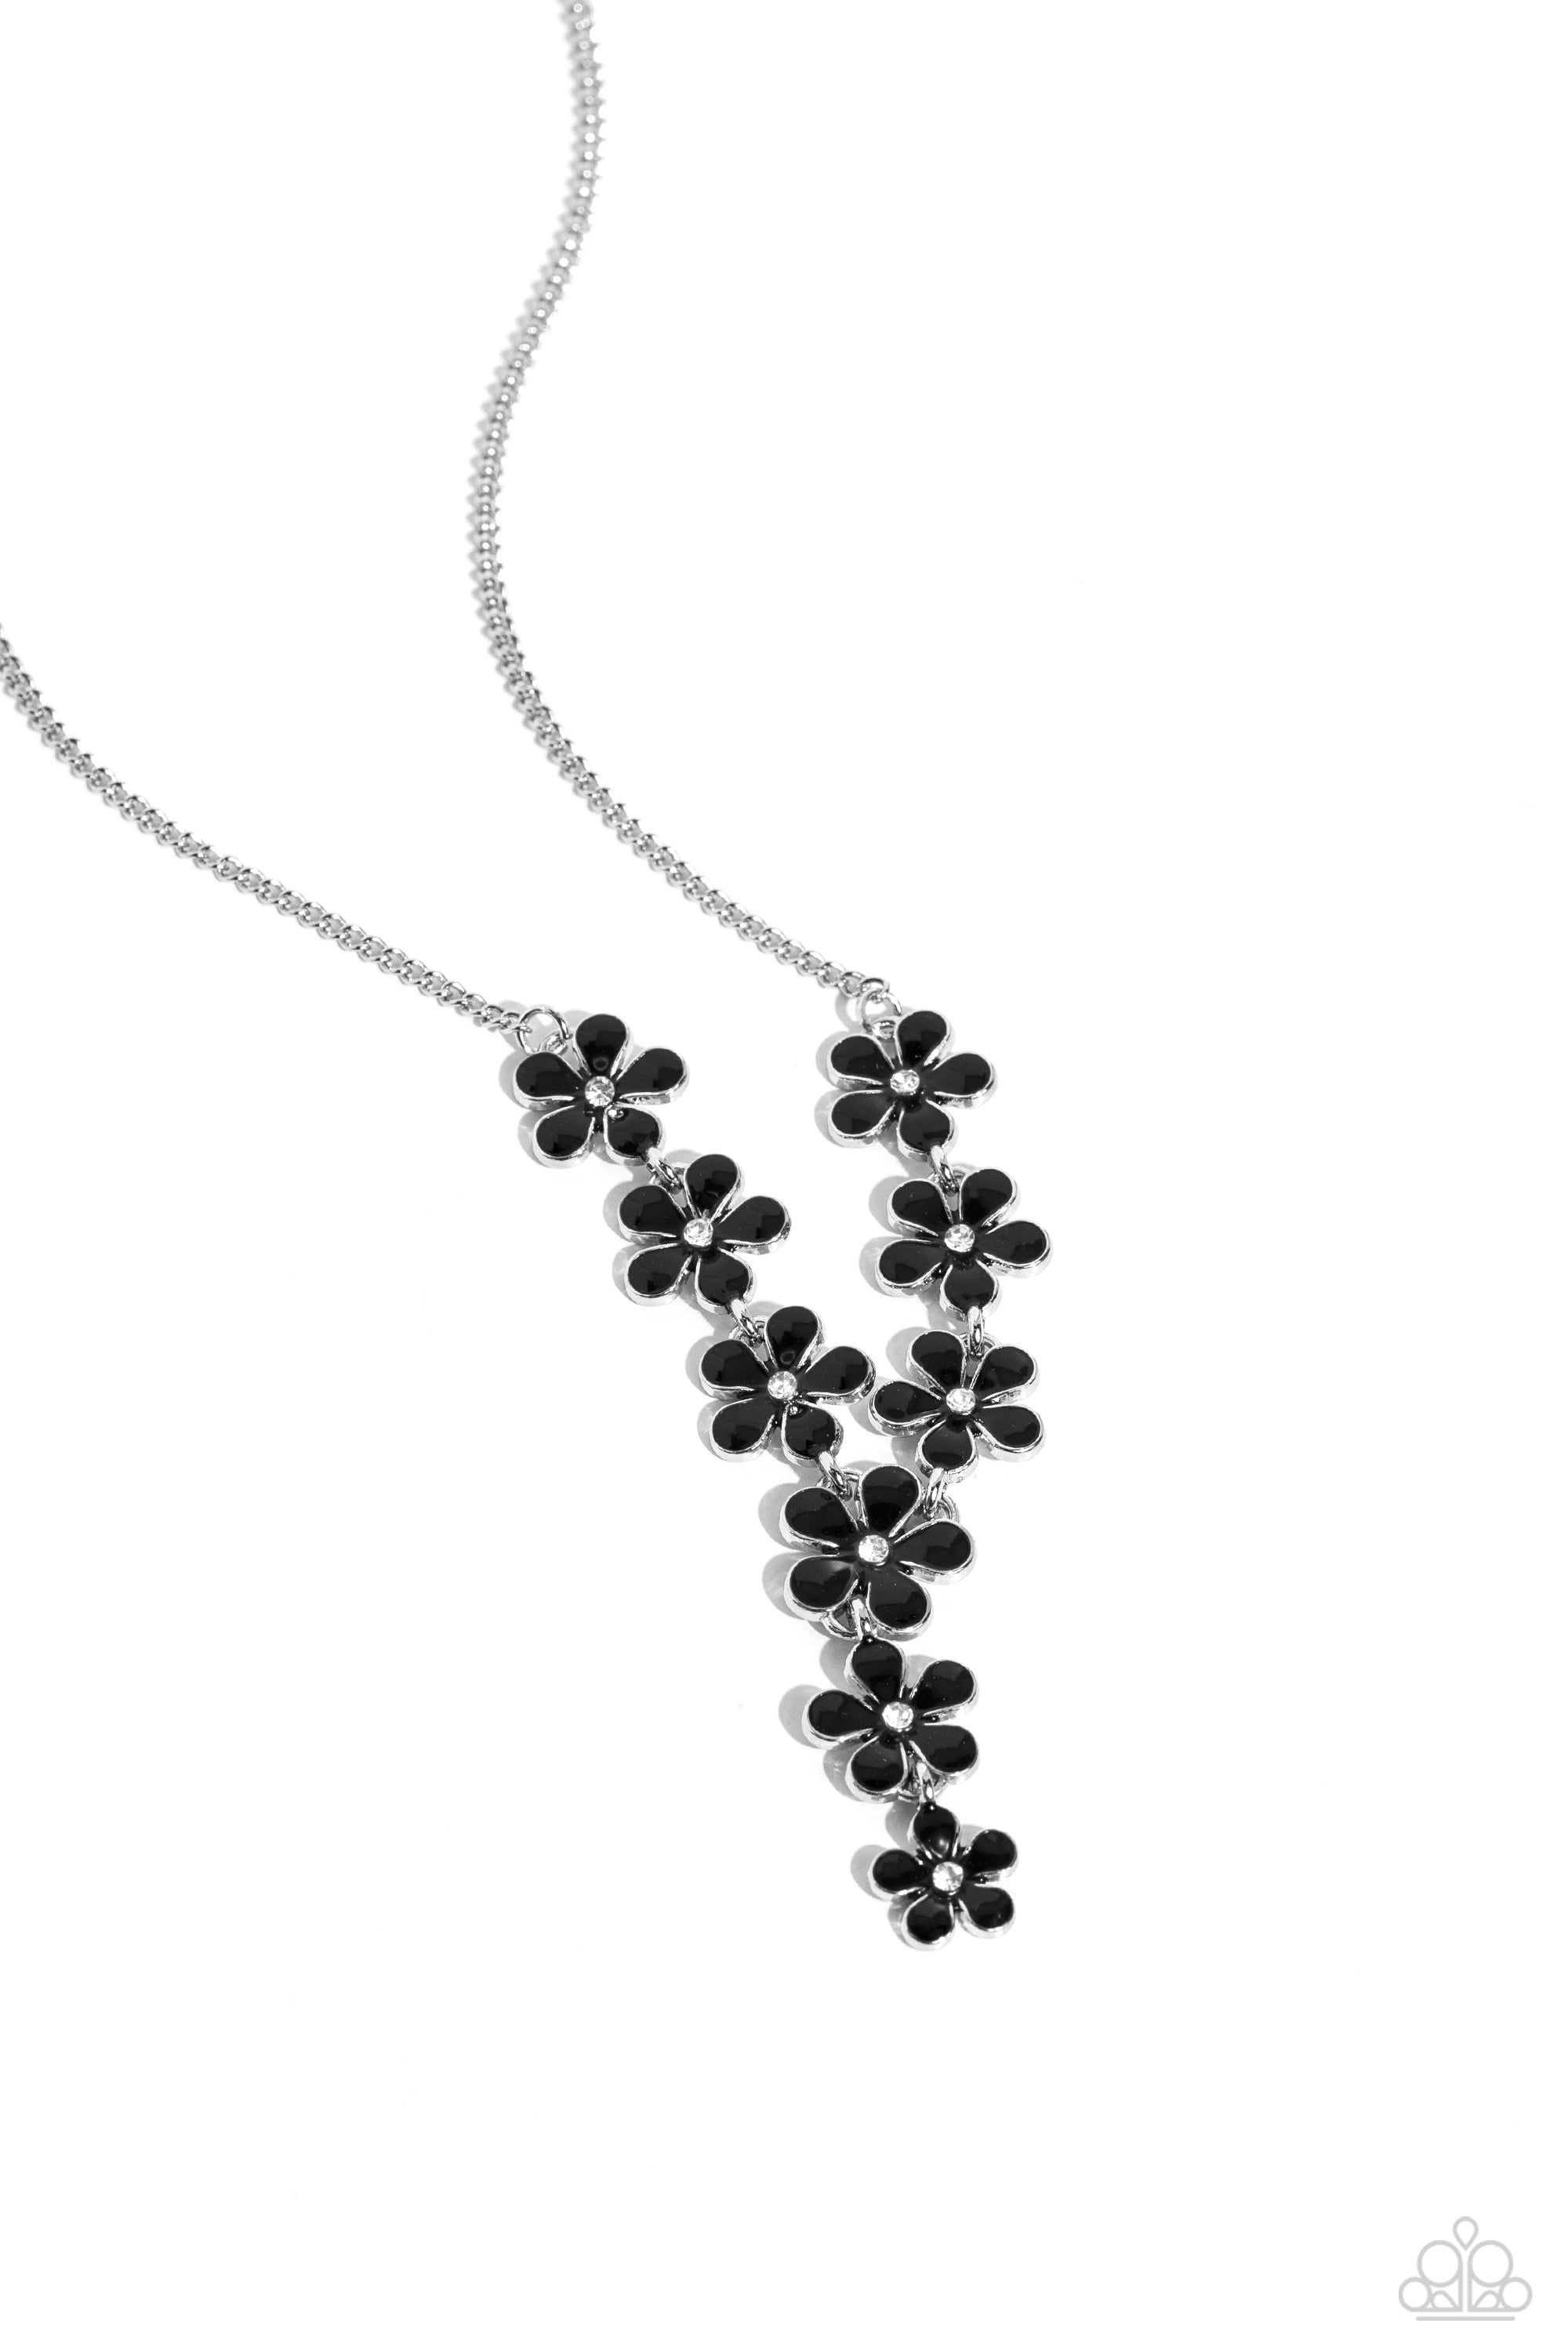 Flowering Feature Black Necklace - Paparazzi Accessories- lightbox - CarasShop.com - $5 Jewelry by Cara Jewels